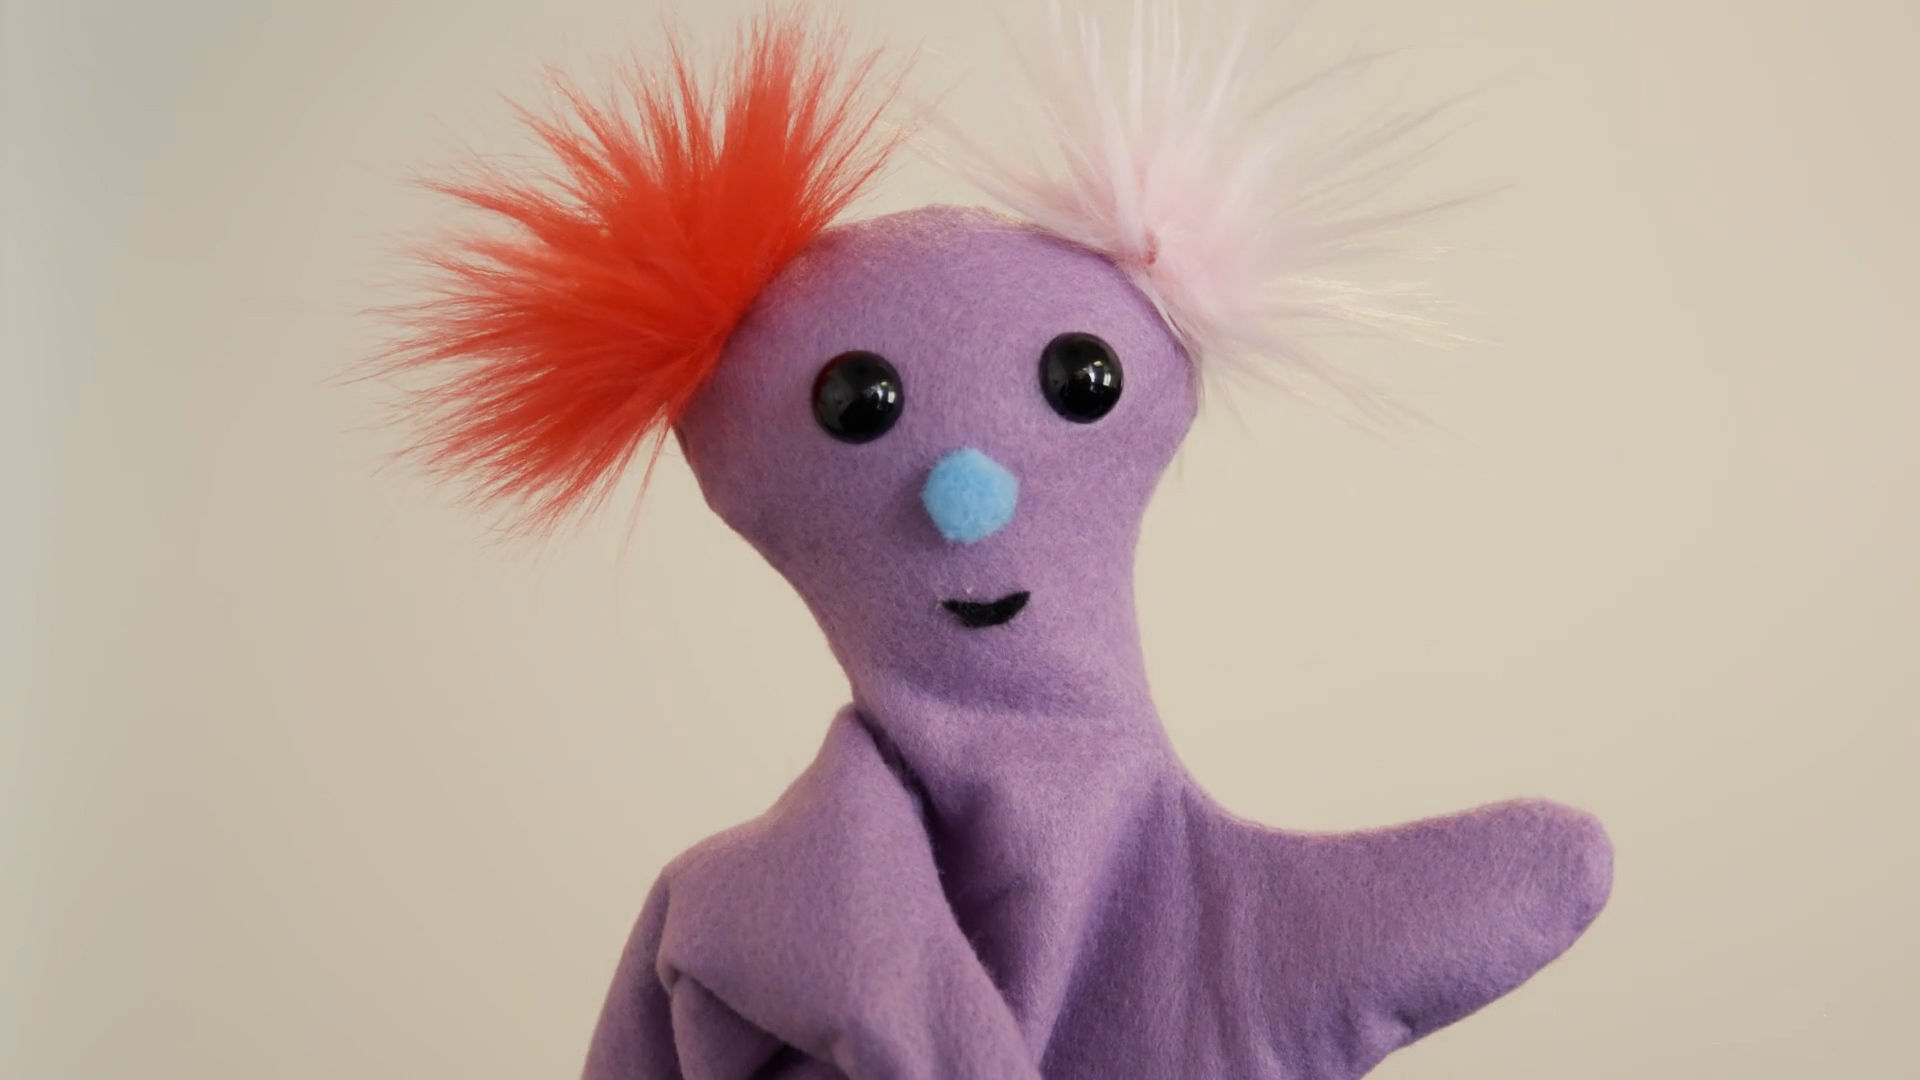 Autism and Puppets | Yale Research Shows Potential for Connection